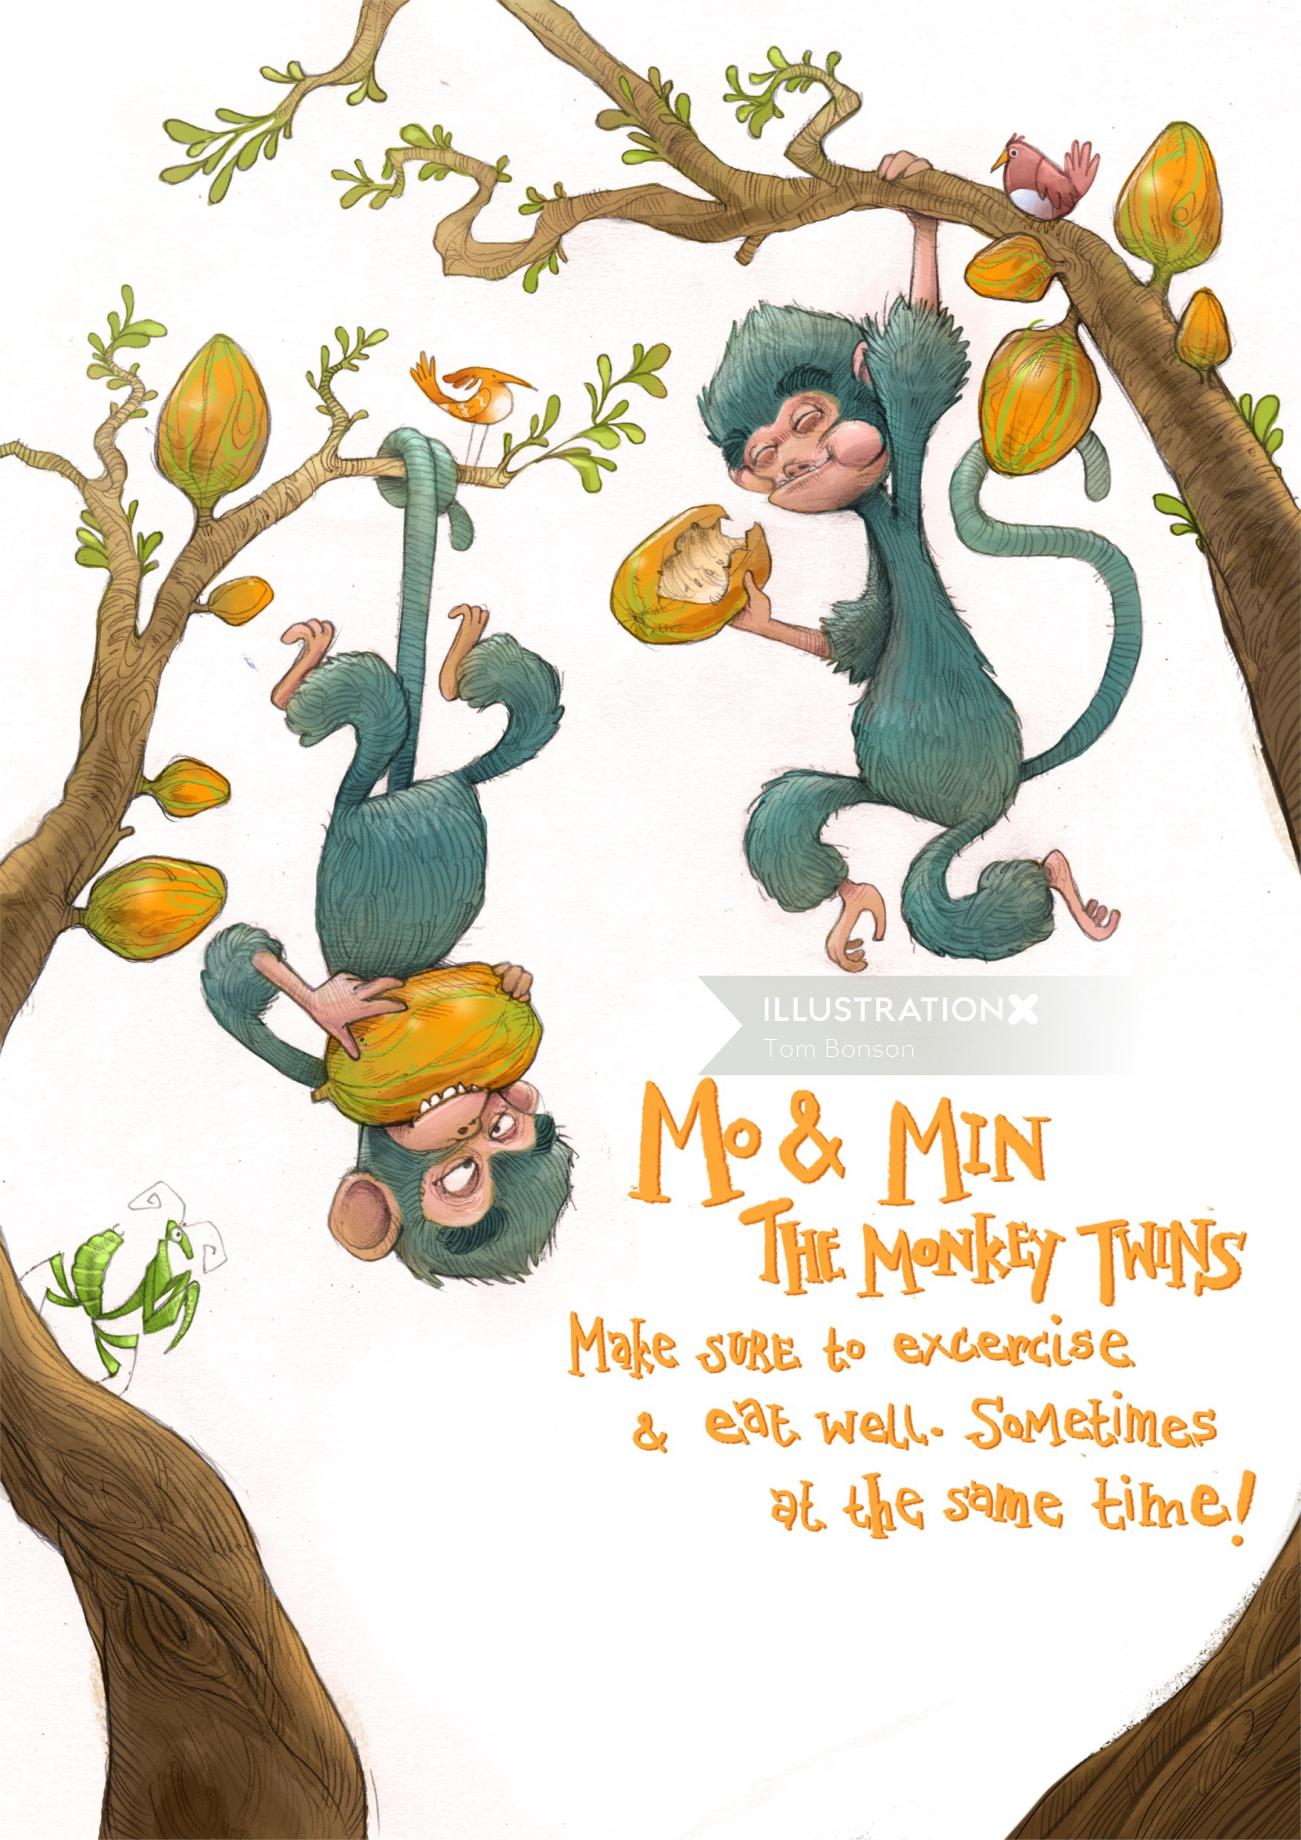 Character Design of The Monkey Twins